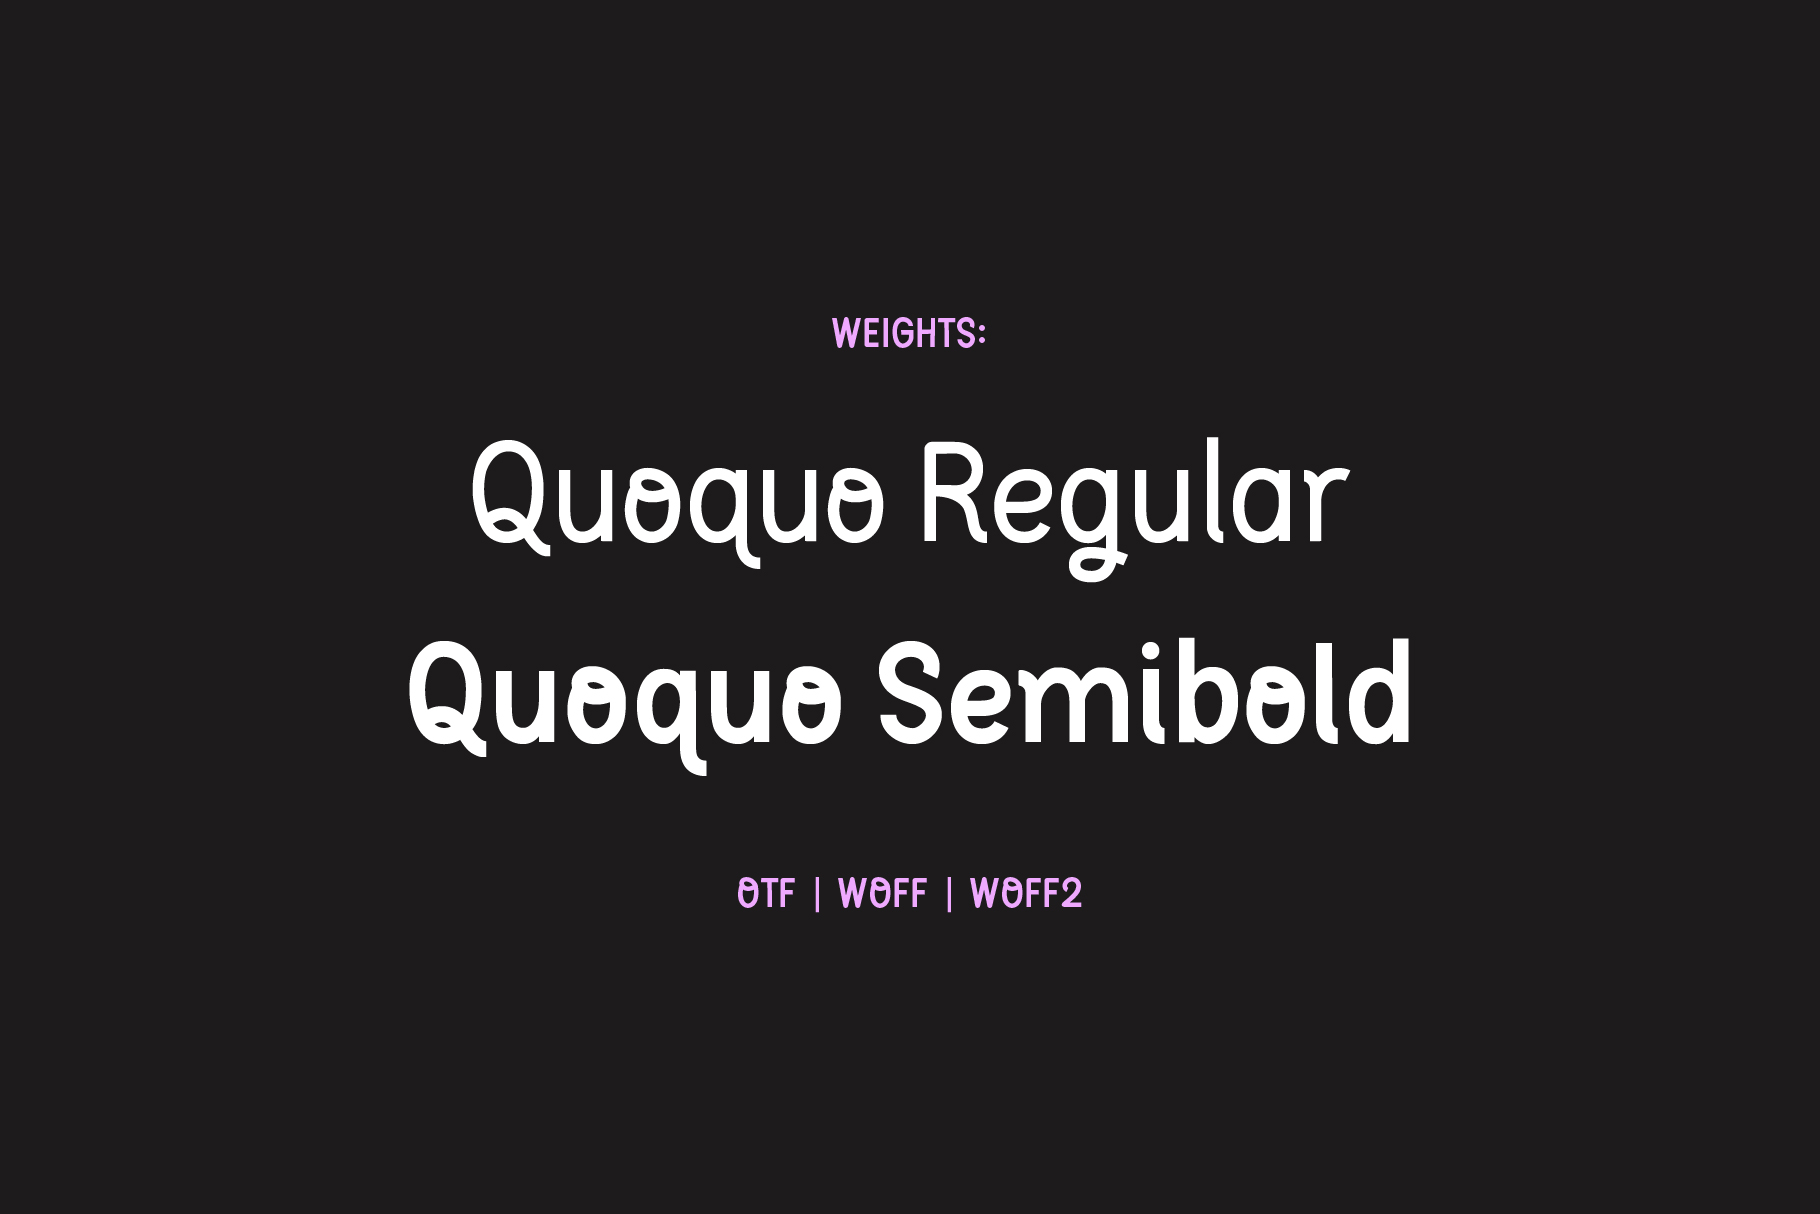 Quoquo font comes in two weights: Regular and Sembold.